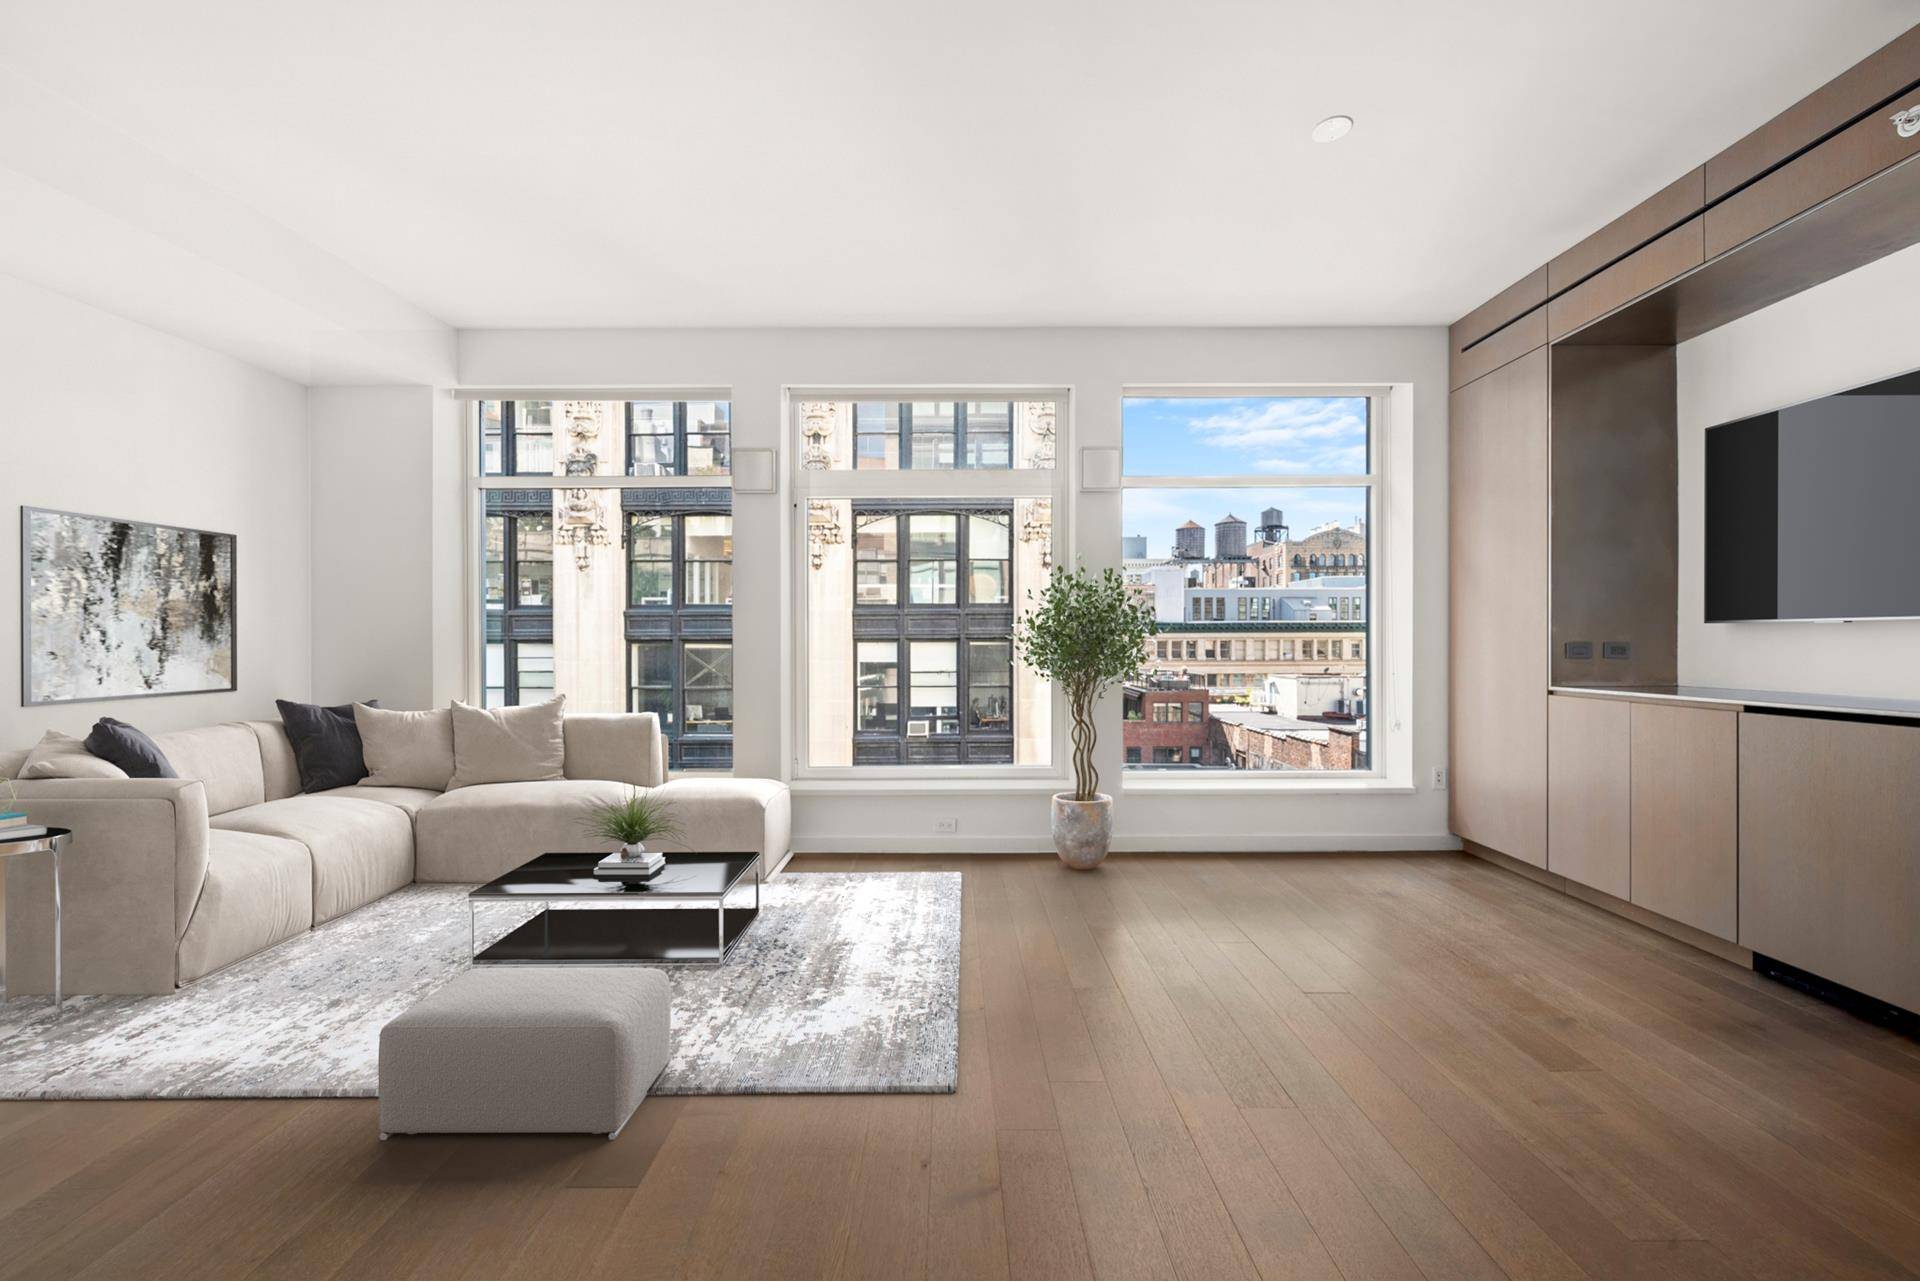 Introducing a stunning two bedroom, two bath loft condominium in the heart of Flatiron, a neighborhood known for its vibrant culture and convenience.